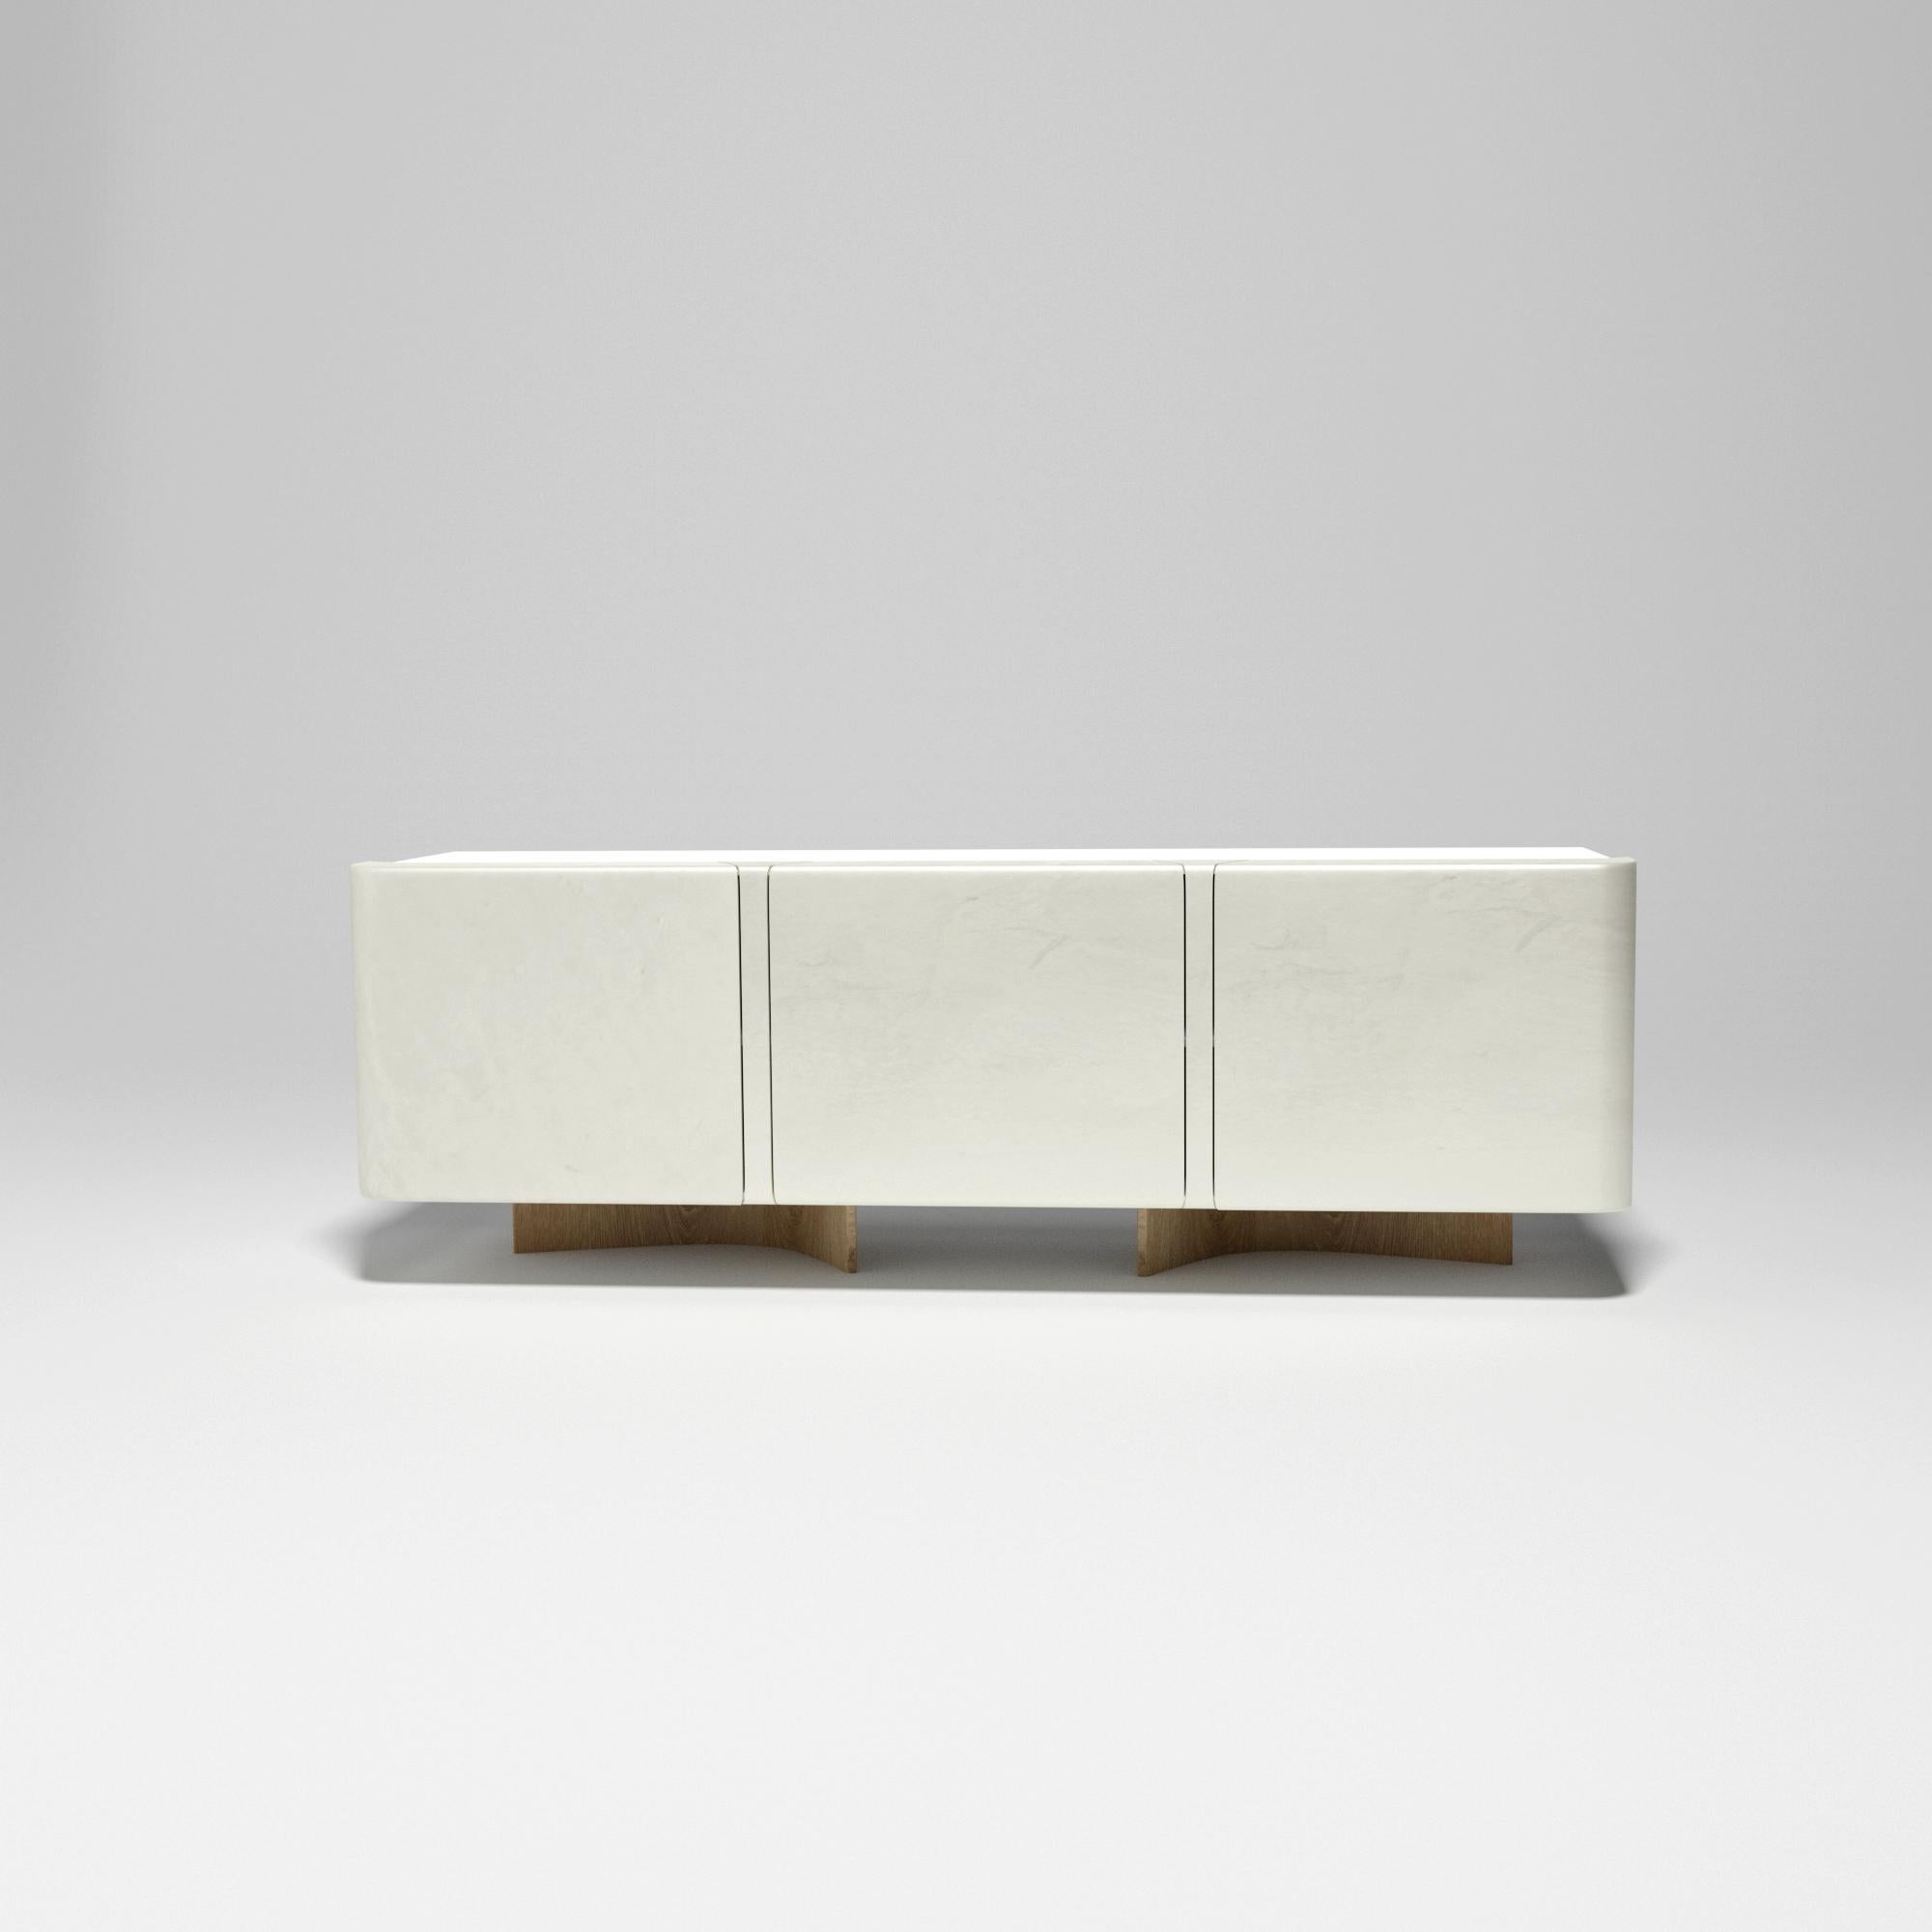 Patinated Linden, Lime Powder Coated 21st Century Design Sideboard by Studio SORS